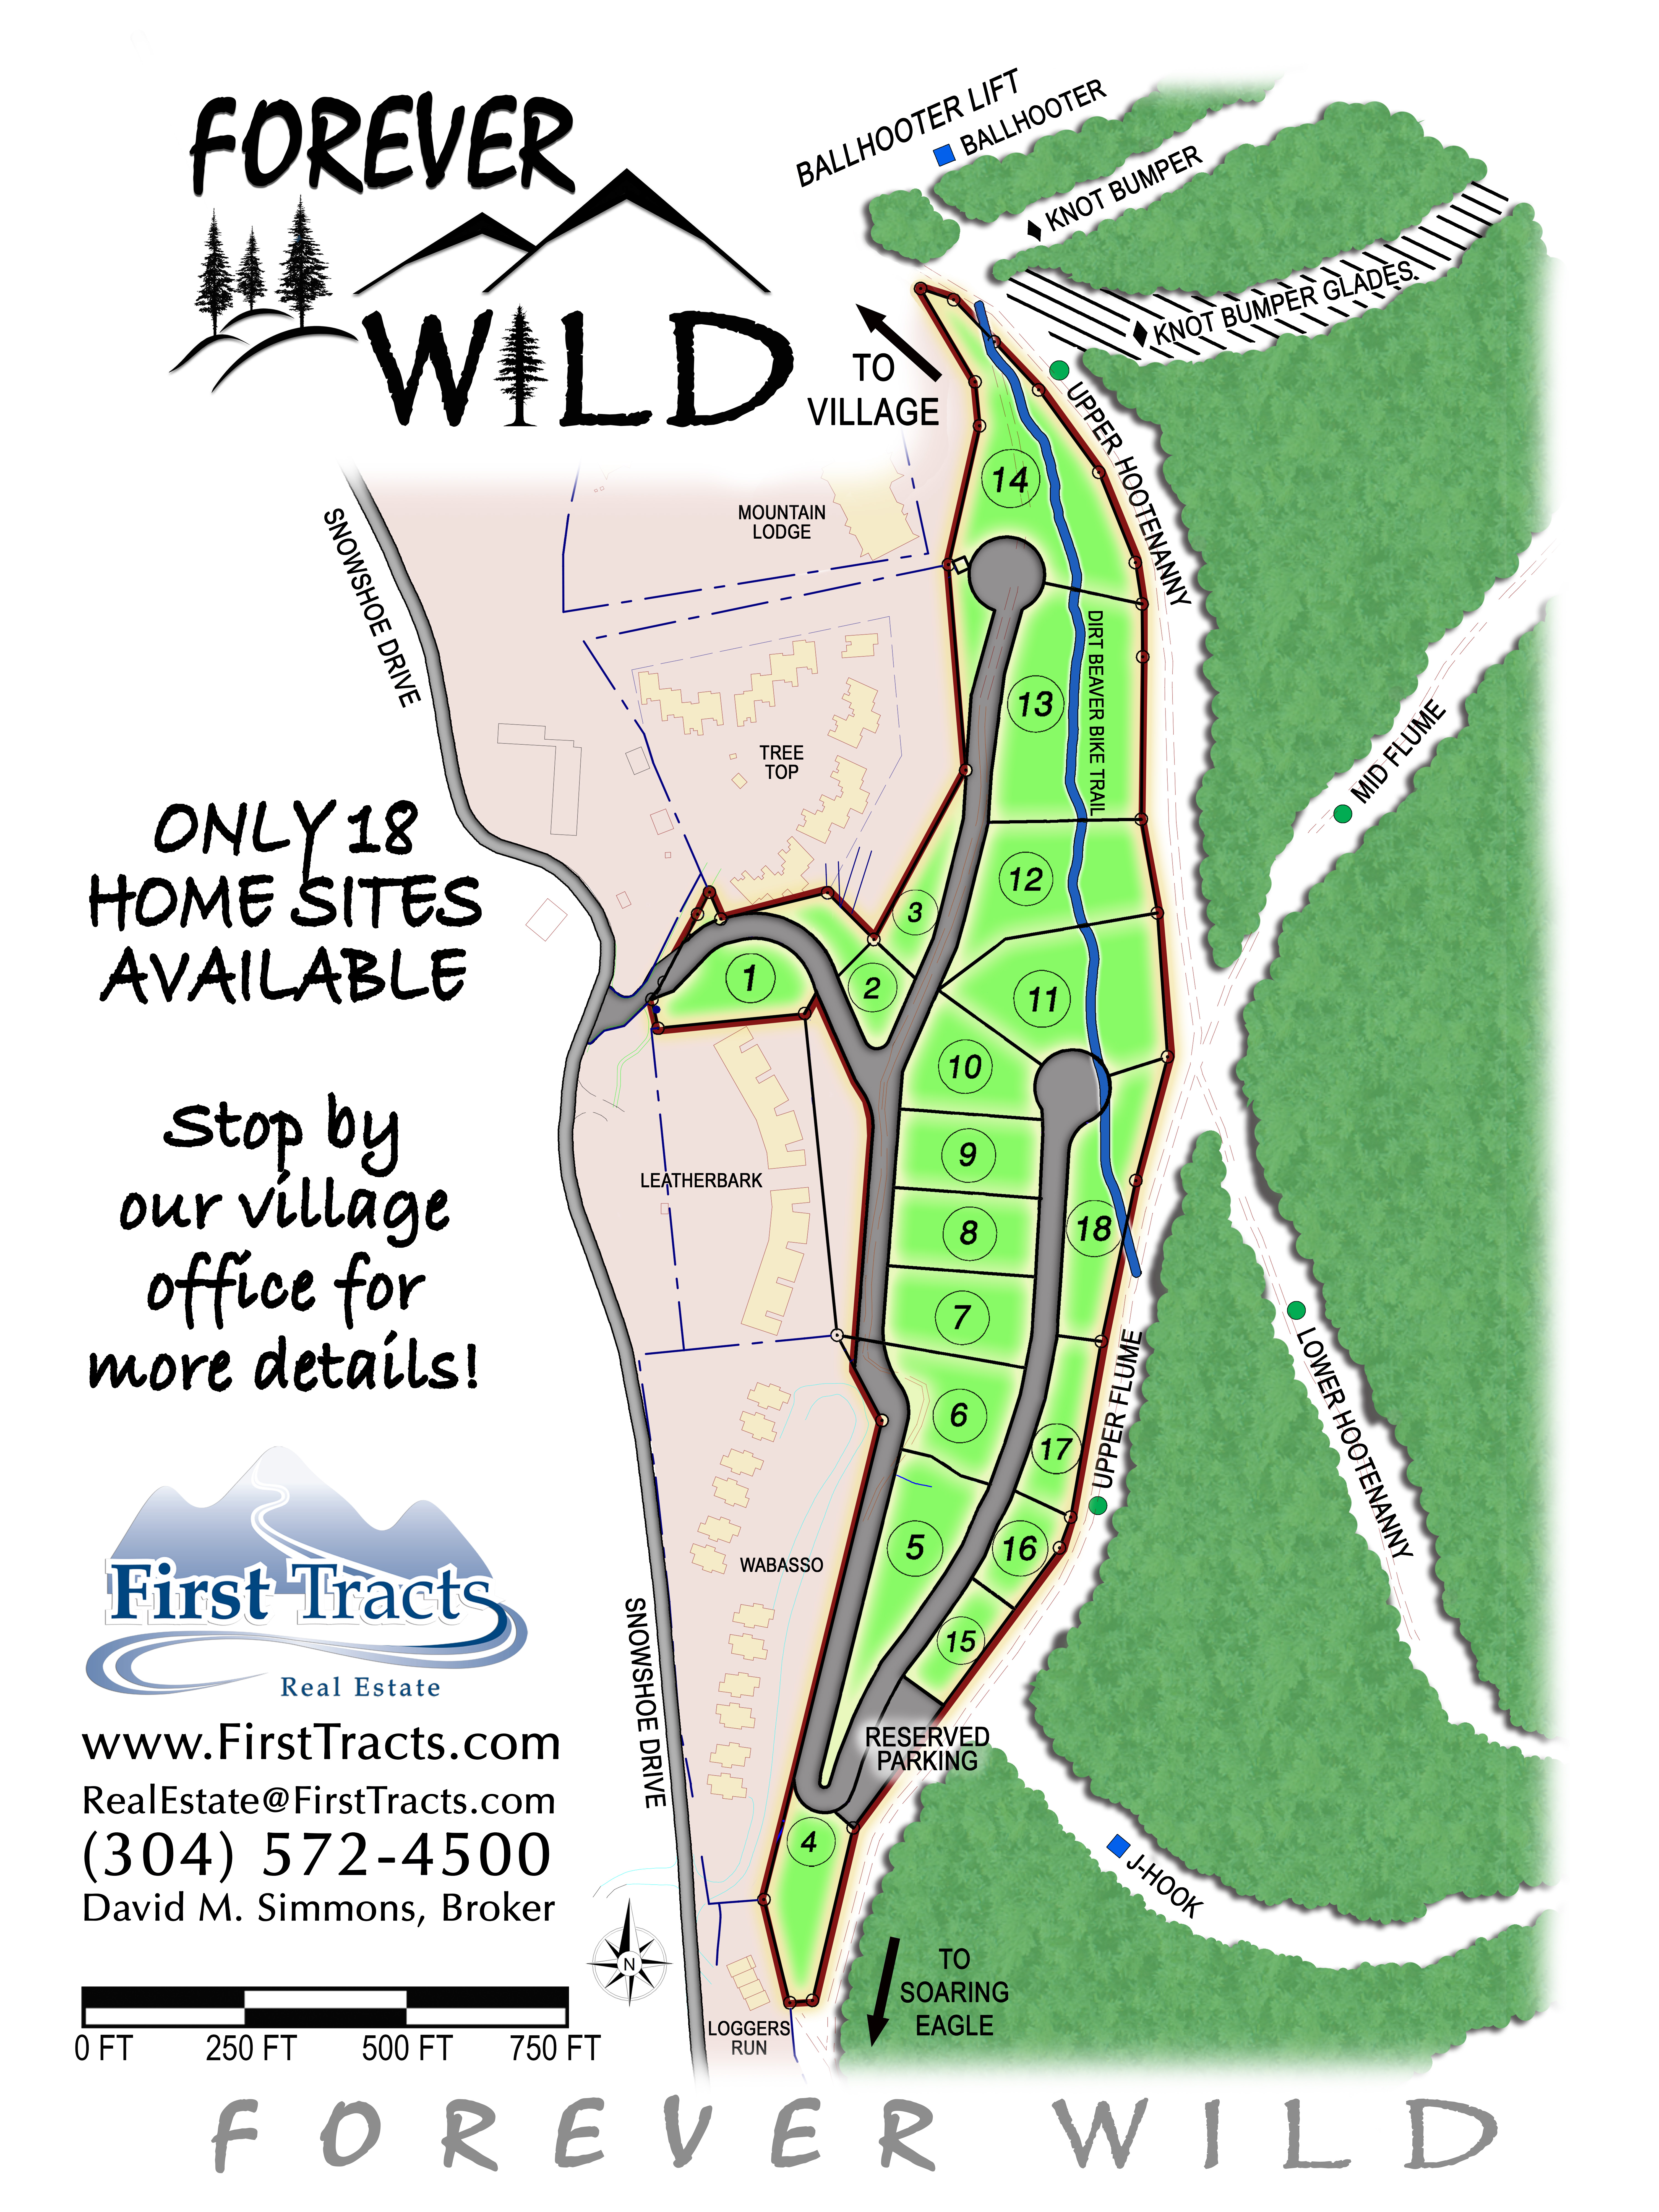 Forever Wild Site Plan